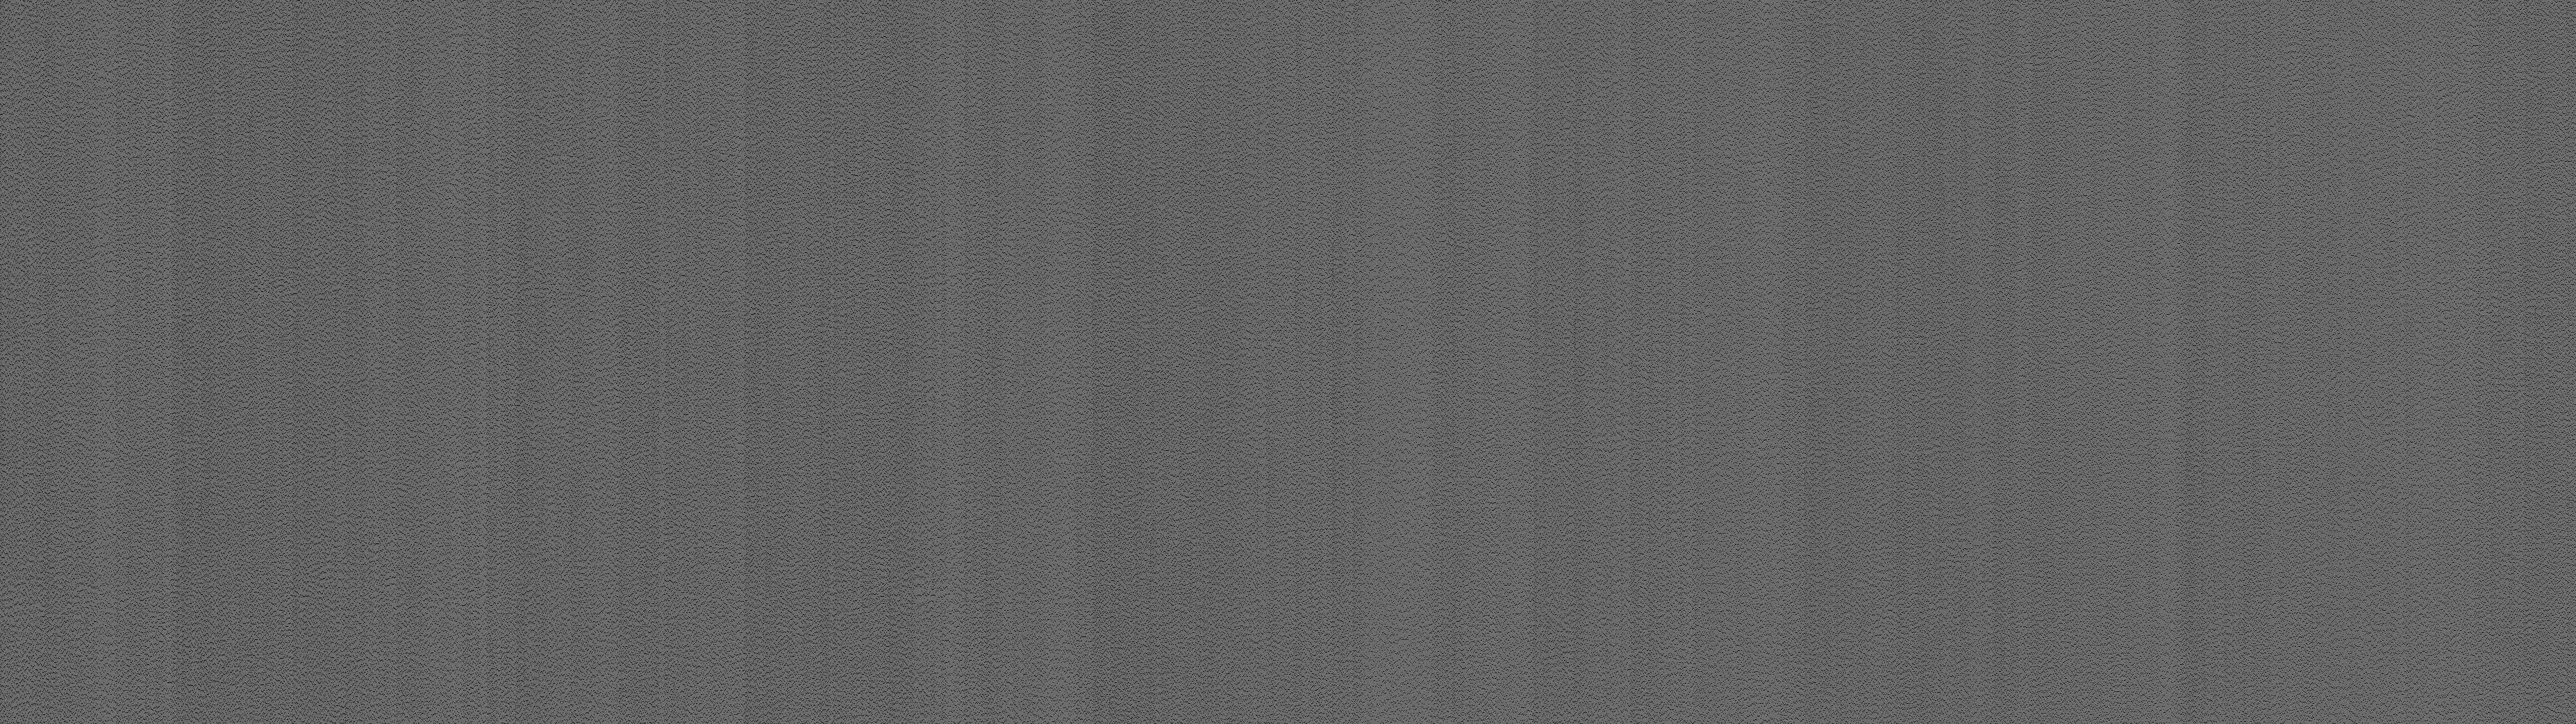 grayscale-image-for-dictionary